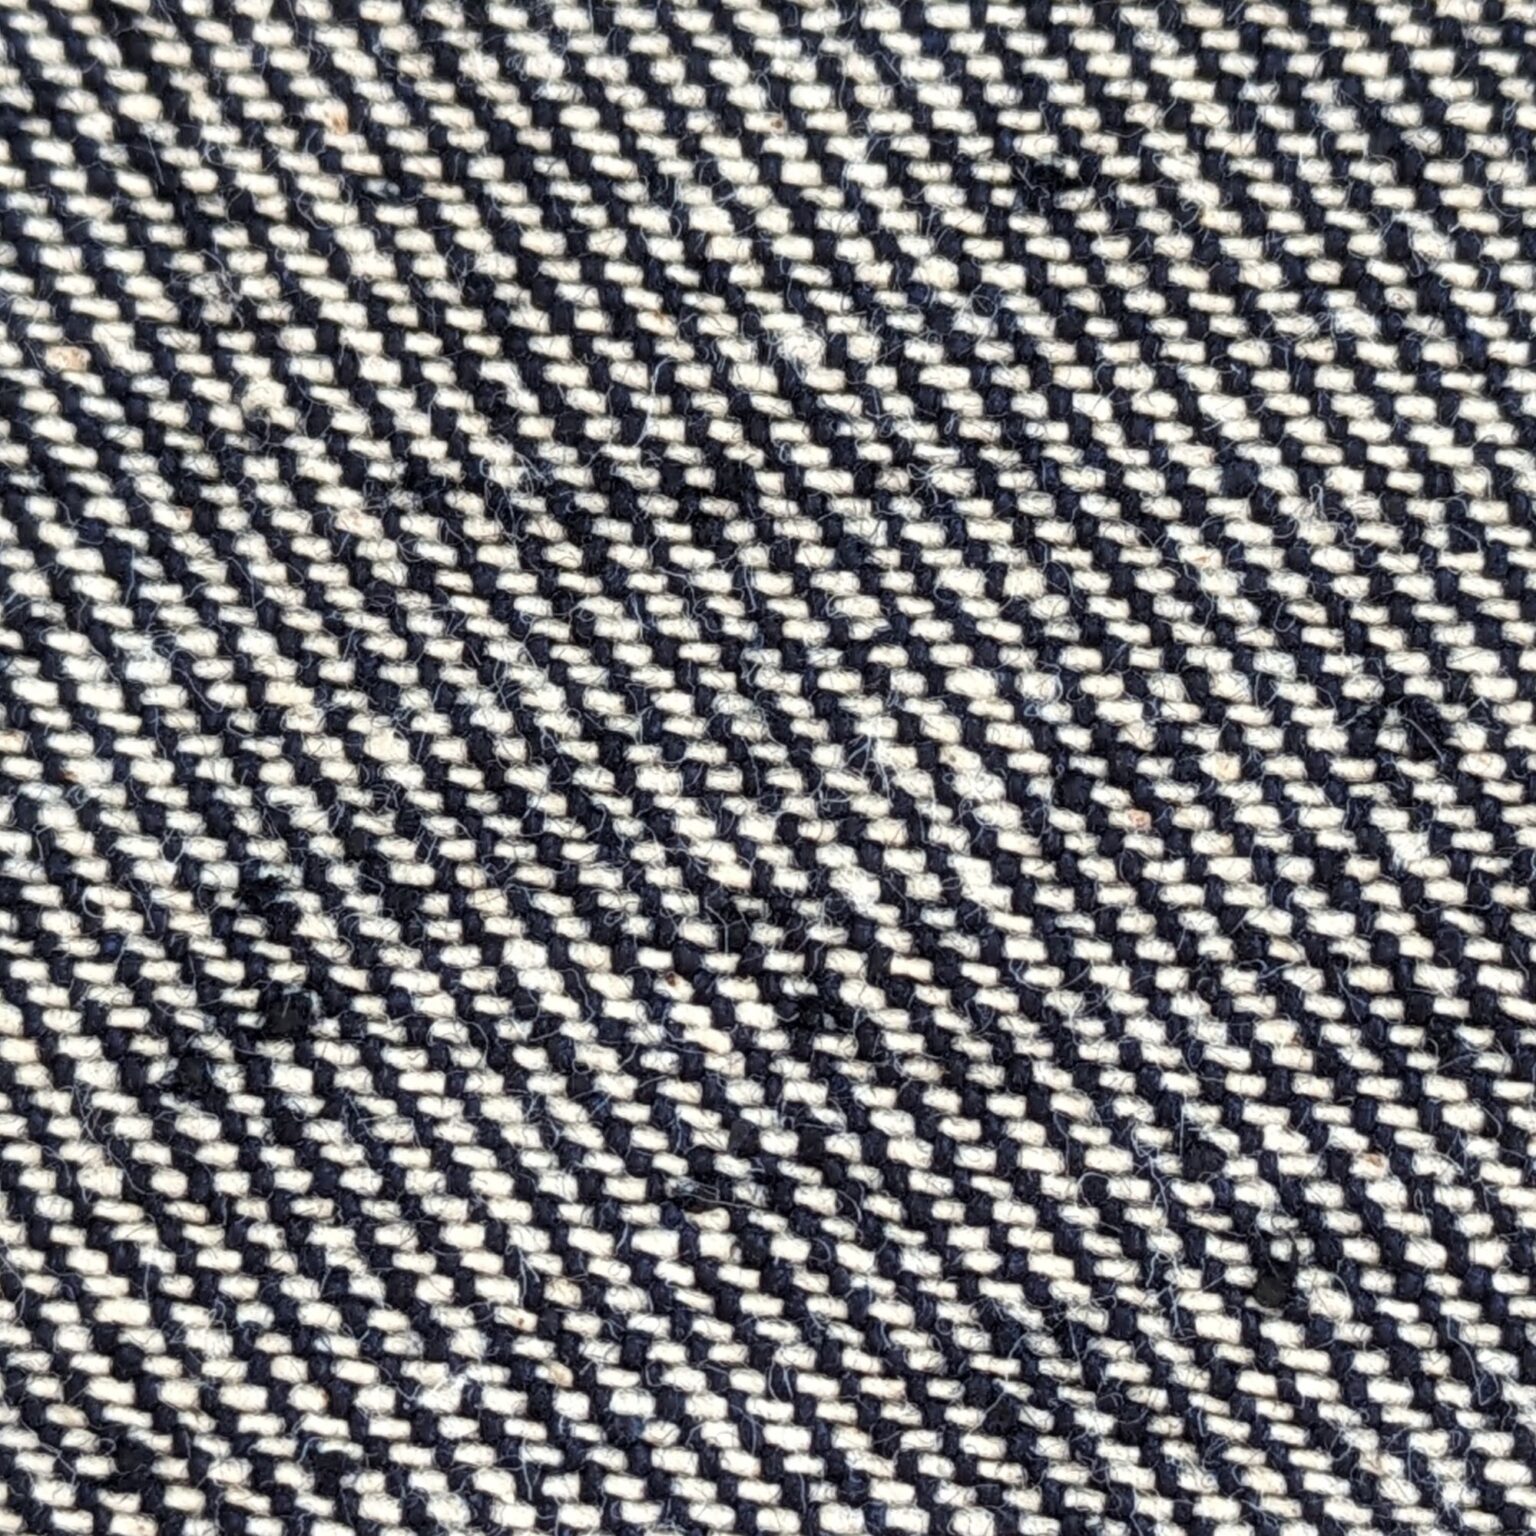 Denim Fabric Reverse Side Showing The Twill Weave